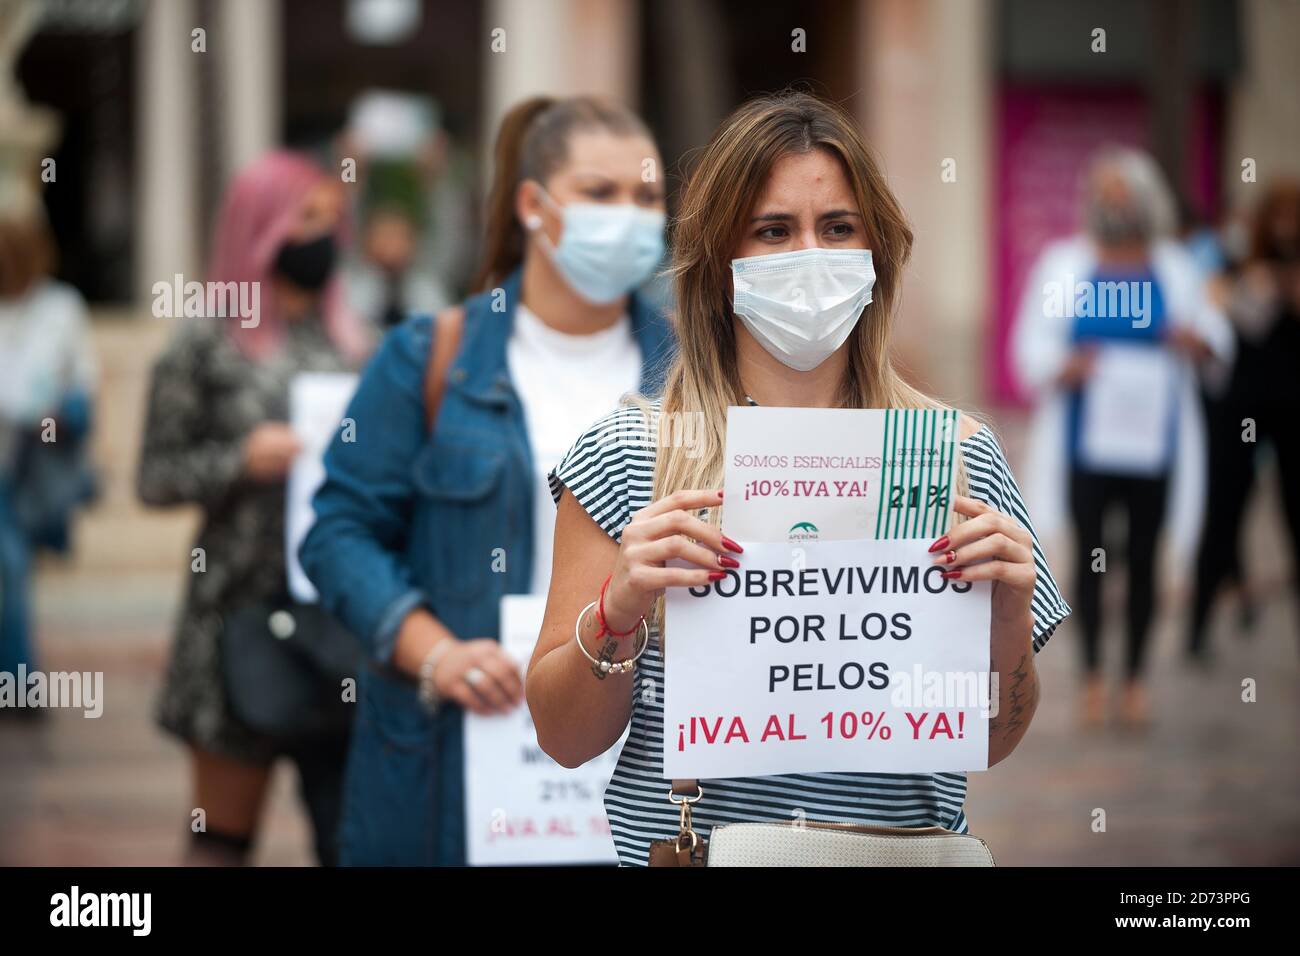 Protesters wearing face masks hold placards expressing their opinions at Plaza de la Constitucion square during the demonstration.The association of hairdresser and Malaga beauty association  demand the government to lower VAT rate from 21% to 10% for their sector, which is considered an 'essential jobs' under the context of the coronavirus pandemic. The hairdressers and beauty centres were closed due to the coronavirus pandemic and many of them have lost their incomes, after it reopening with restrictions and limit capacity. Stock Photo